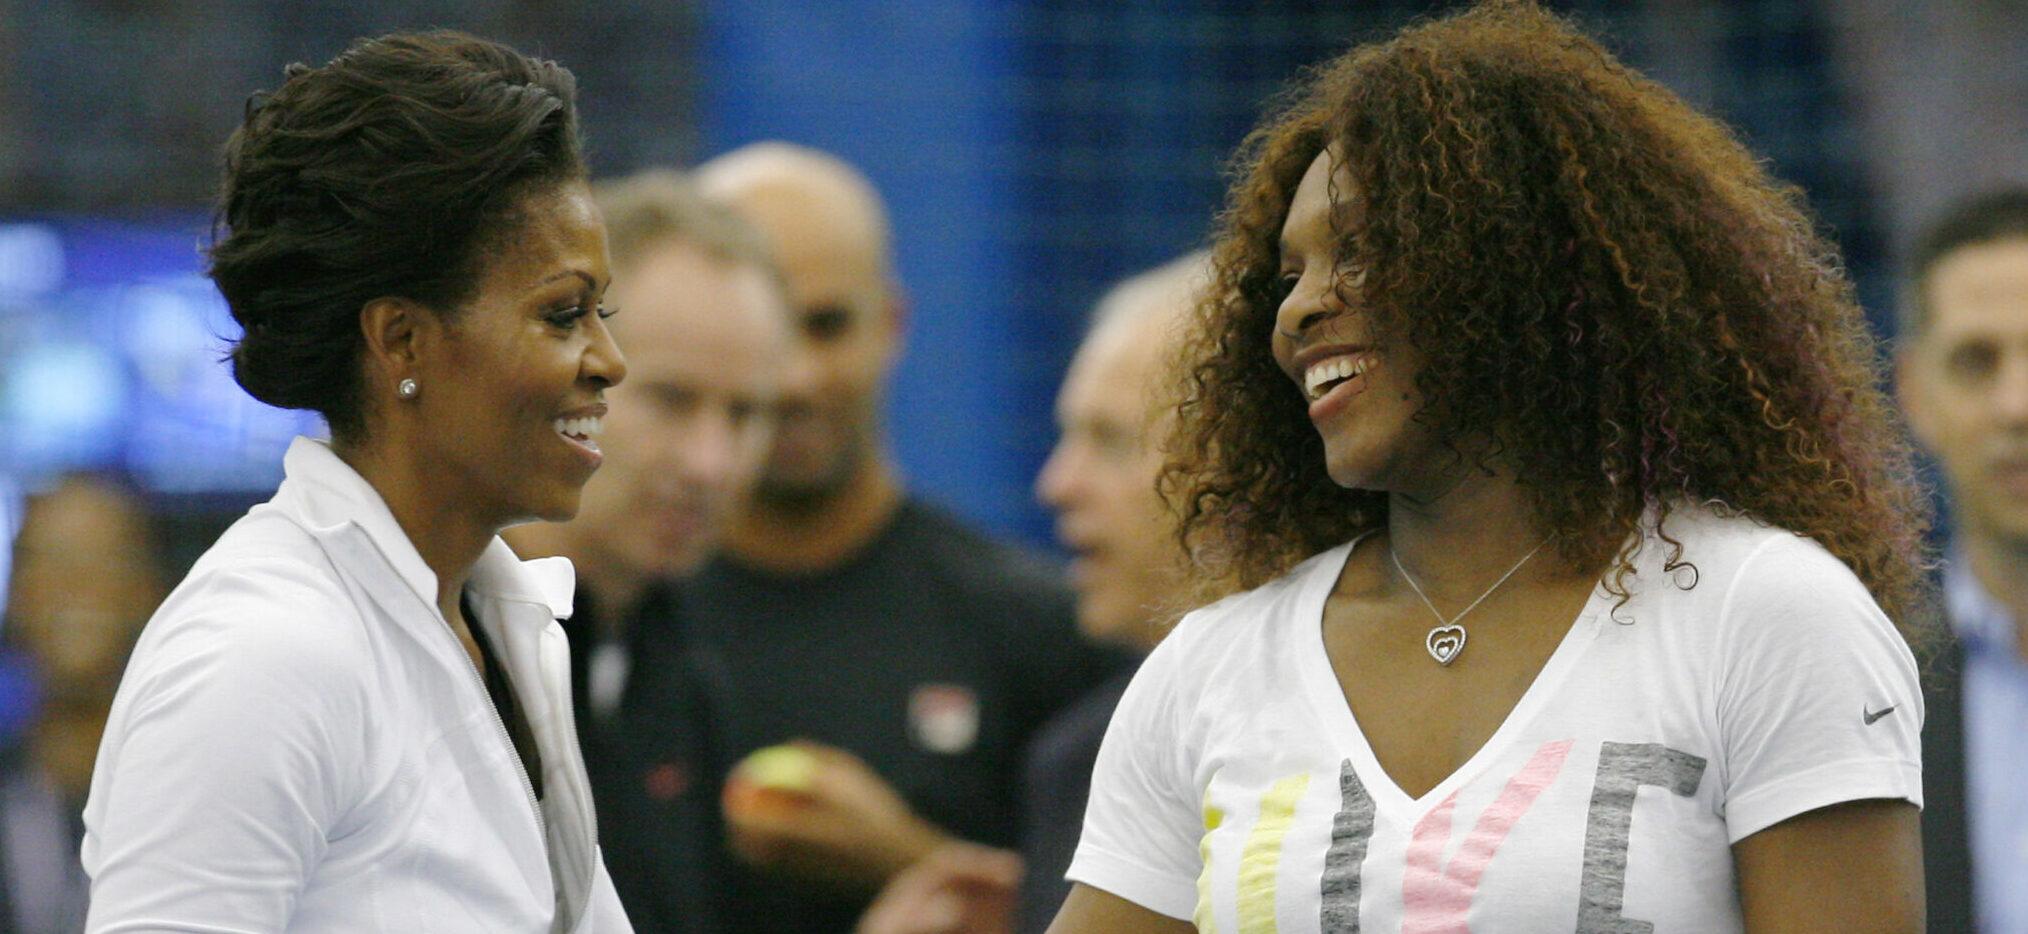 Former First Lady Michelle Obama participated in "Lets Move!" tennis clinic at the U.S. Open in New York with Serena Williams